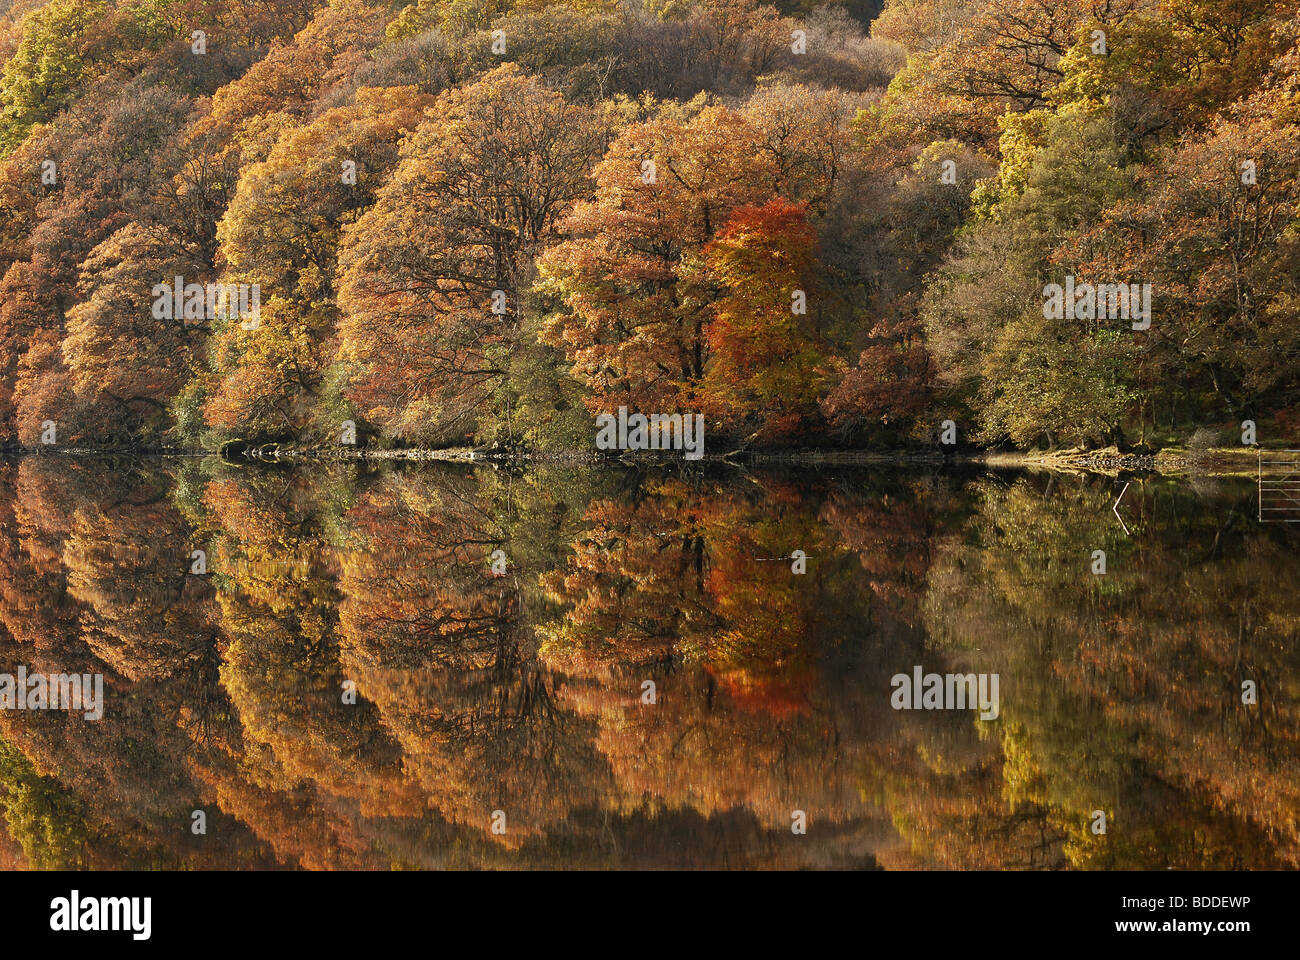 Autumn colour reflected in the still waters of Loch Avich, Kilchrenan, Argyll, Scotland, UK. Stock Photo